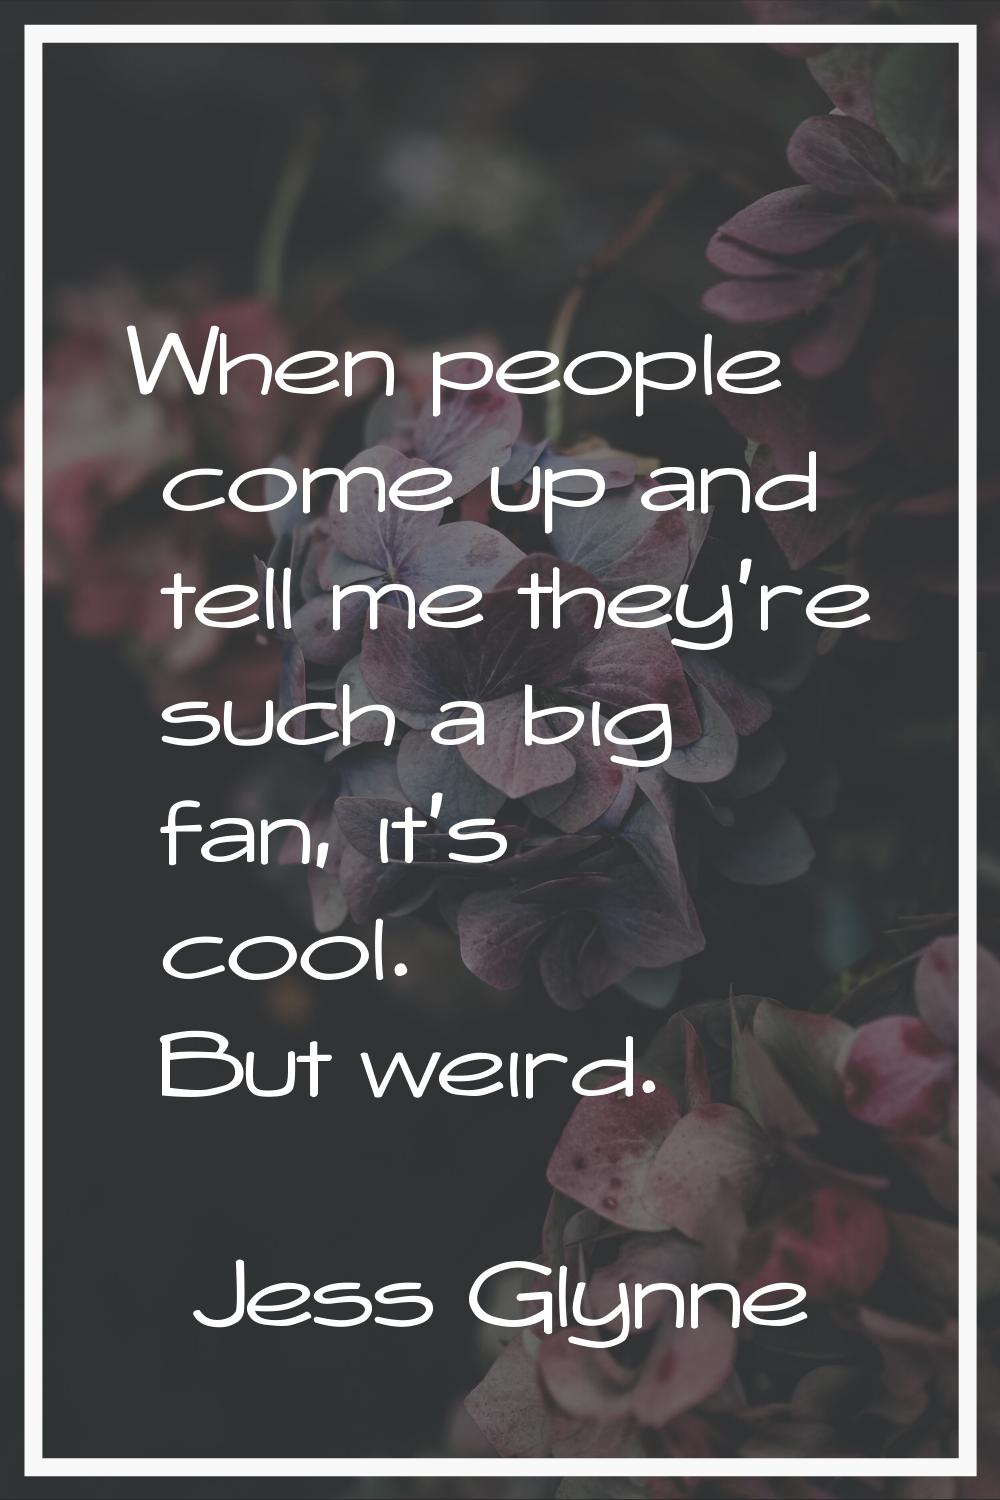 When people come up and tell me they're such a big fan, it's cool. But weird.